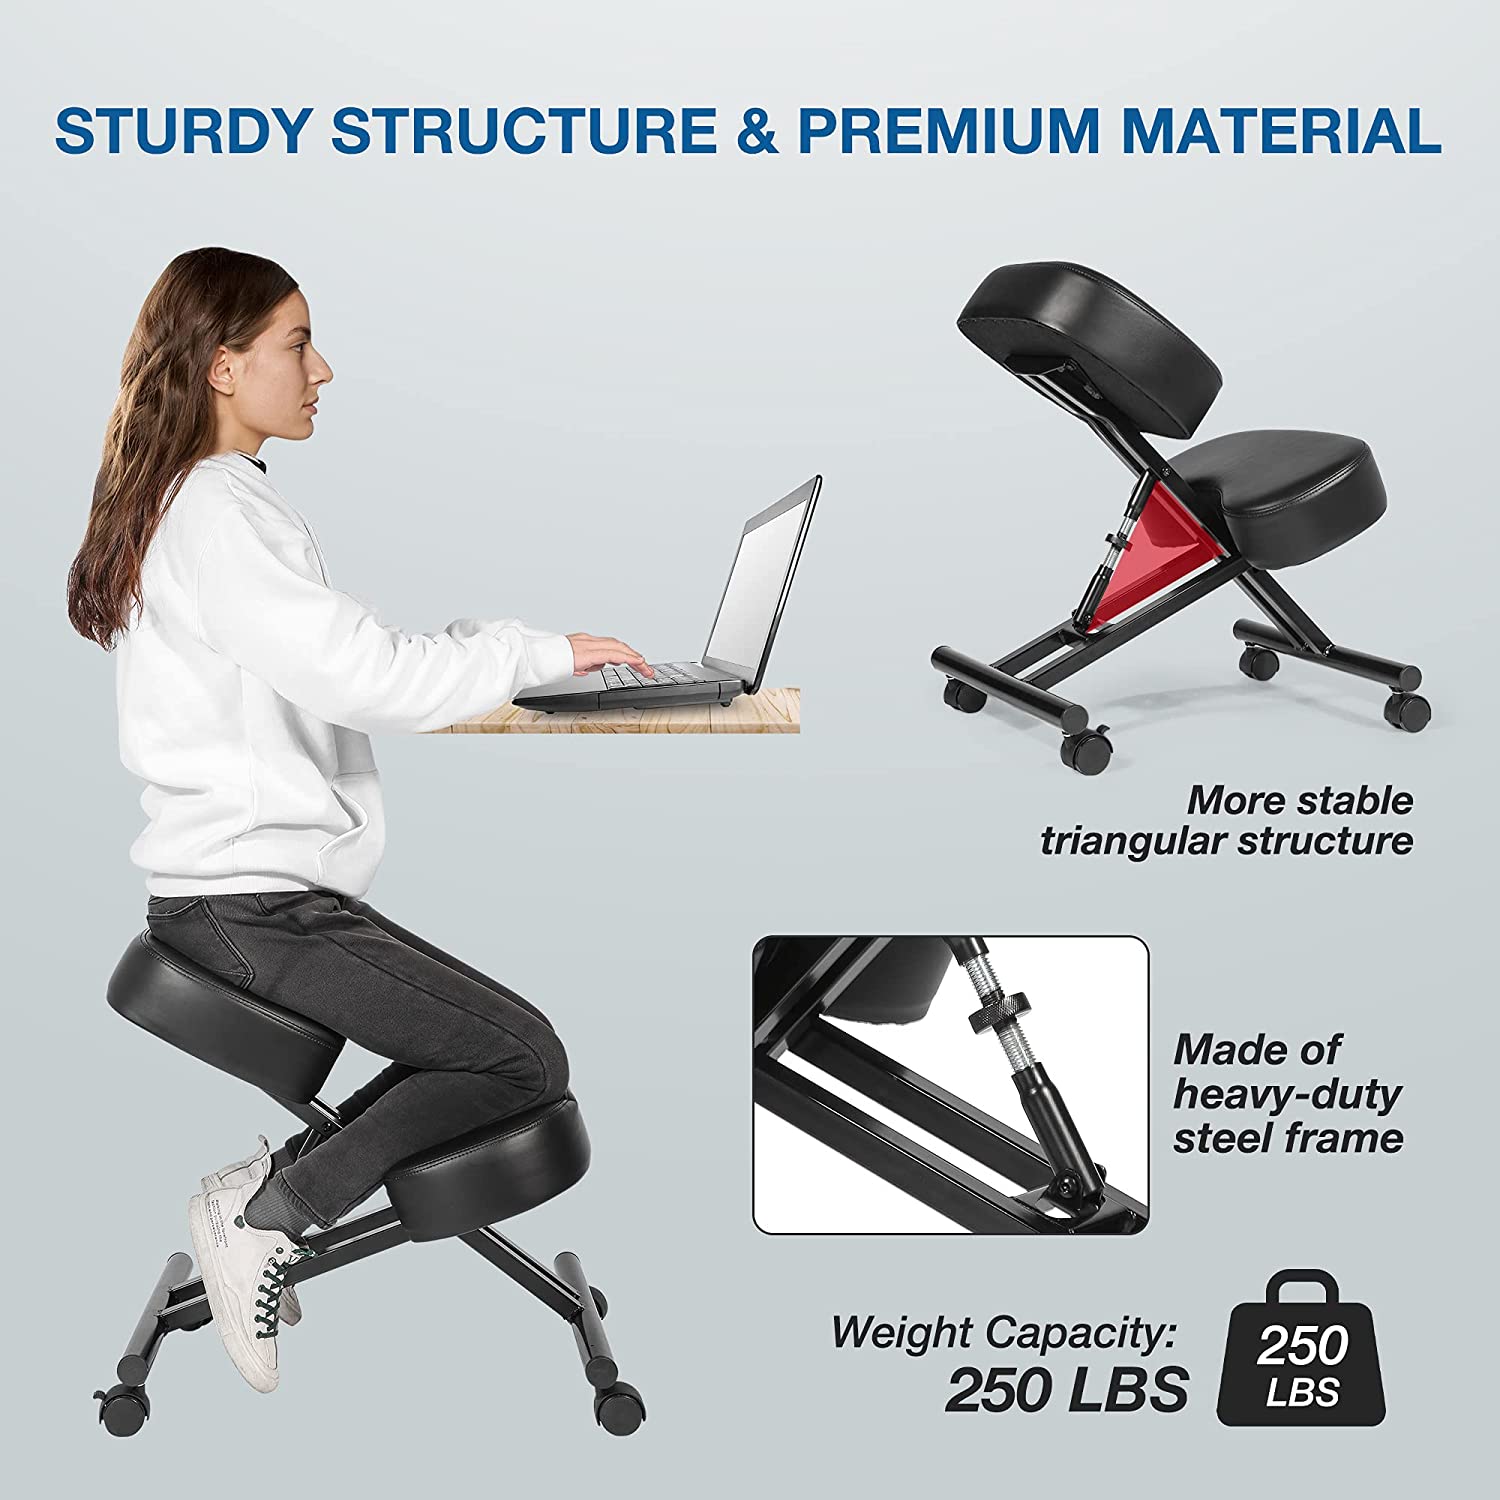 Ergonomic Kneeling Chair for Relieving Back Pain, Posture Correcting Knee Stool for Home Office Work Station